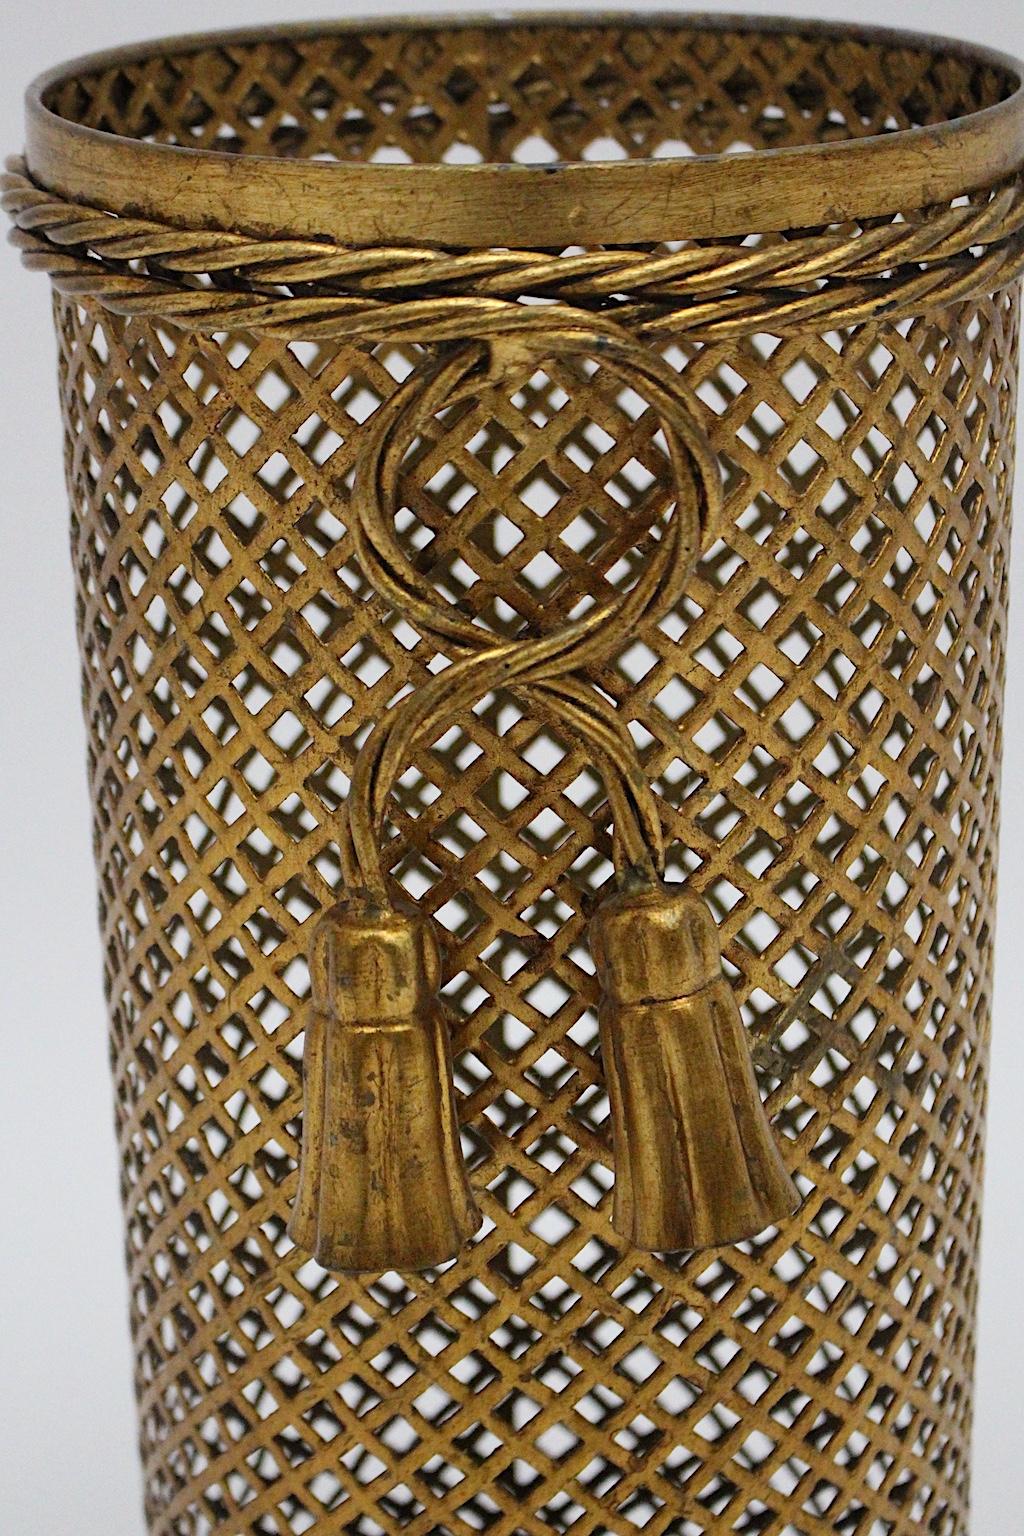 Hollywood Regency Style Gilded Umbrella Stand by Li Puma Firenze, 1950s, Italy For Sale 1